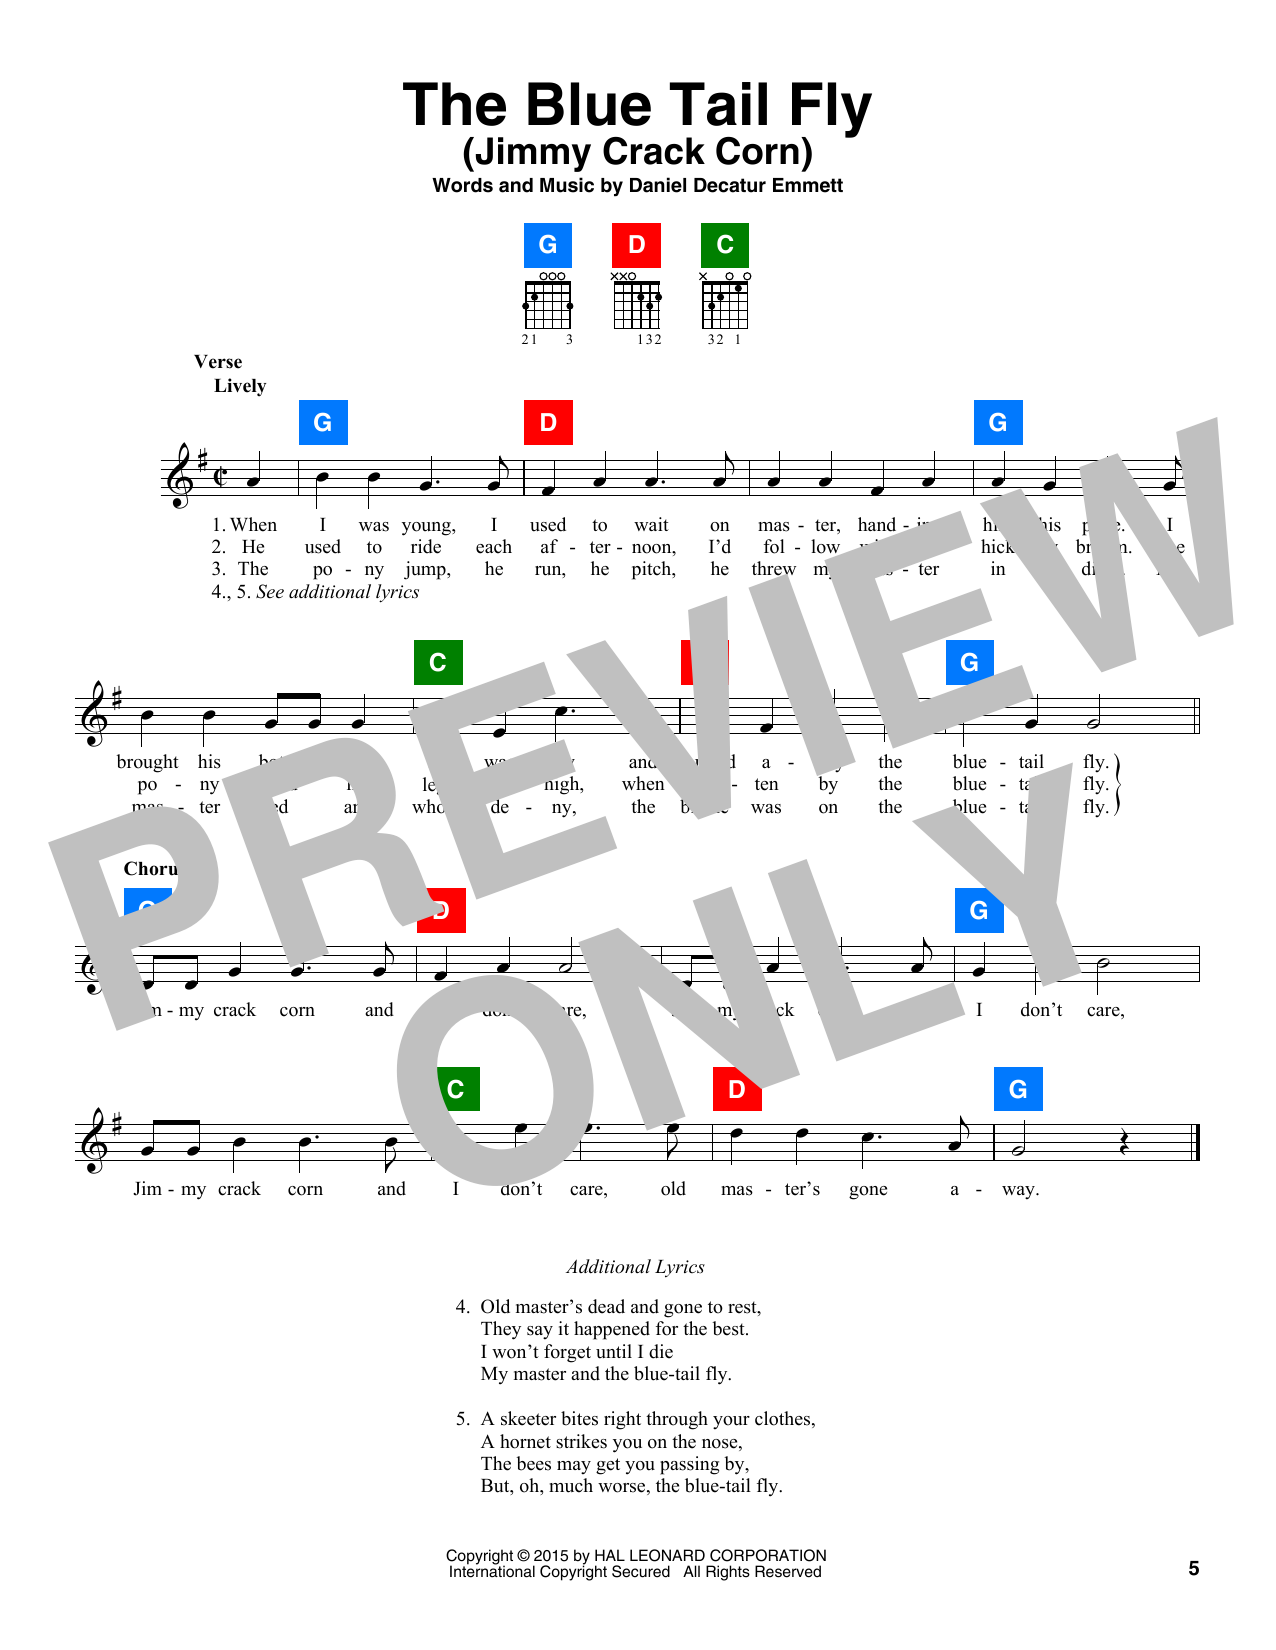 Download Traditional American Folksong The Blue Tail Fly (Jimmy Crack Corn) Sheet Music